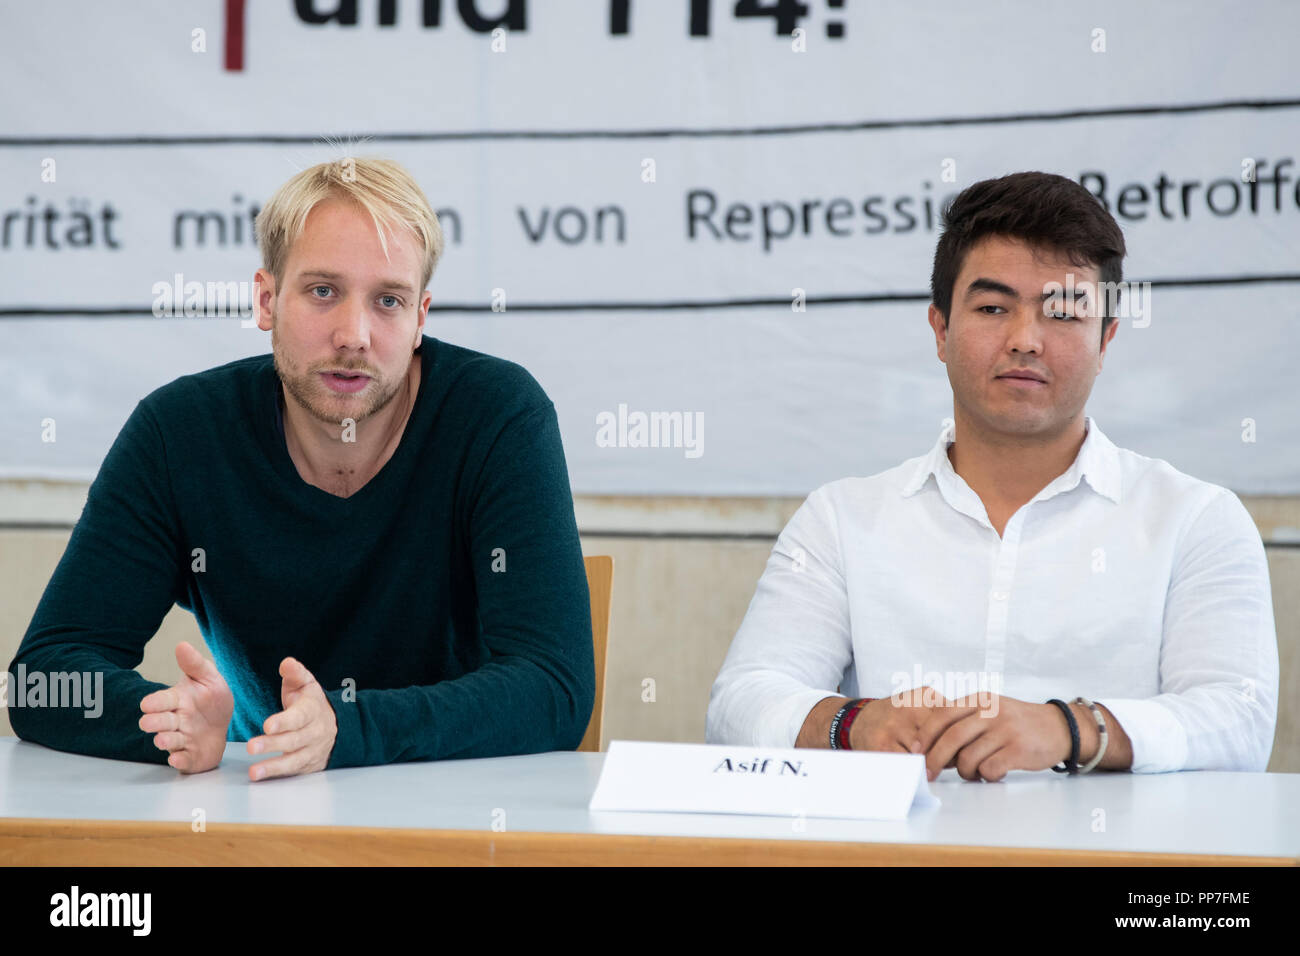 24 September 2018, Bavaria, Nuernberg: Michael Brenner (l), lawyer, speaking alongside his client Asif N., a refugee from Afghanistan, during a press conference on the occasion of a pending trial after a tumultuous deportation attempt. On May 31, 2017, the then 20-year-old was to be taken into deportation custody from a Nuremberg vocational school. The deployment had attracted attention and criticism nationwide. Asif N., who is on trial this Wednesday, 26.09.2018, after a tumultuous deportation attempt in Nuremberg, still hopes for a right of residence in Germany. Photo: Daniel Karmann/dpa Stock Photo